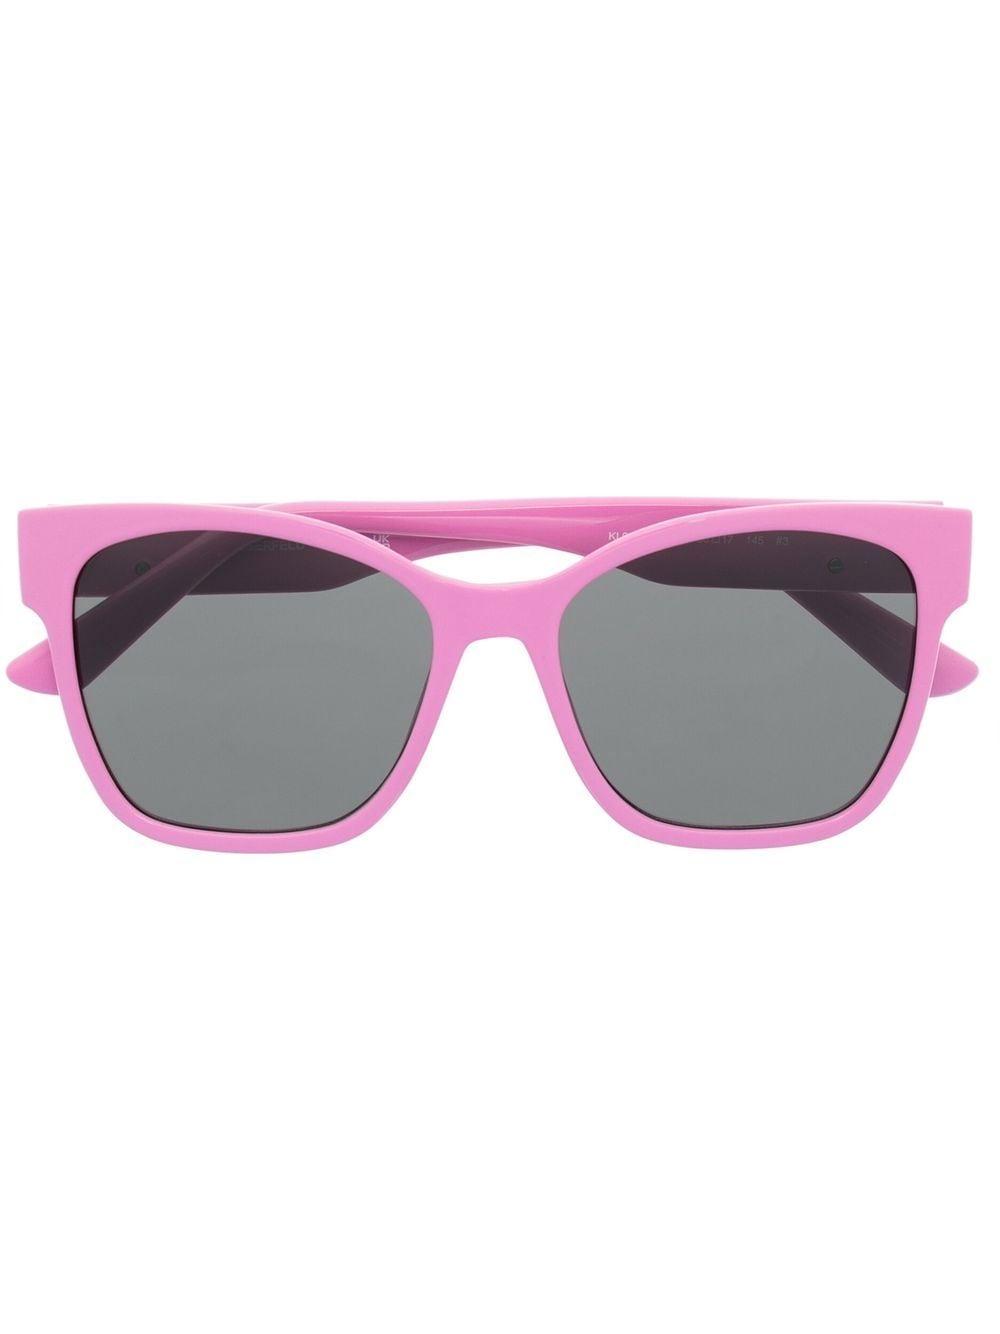 Karl Lagerfeld Kl6087s Square-frame Sunglasses in Pink | Lyst